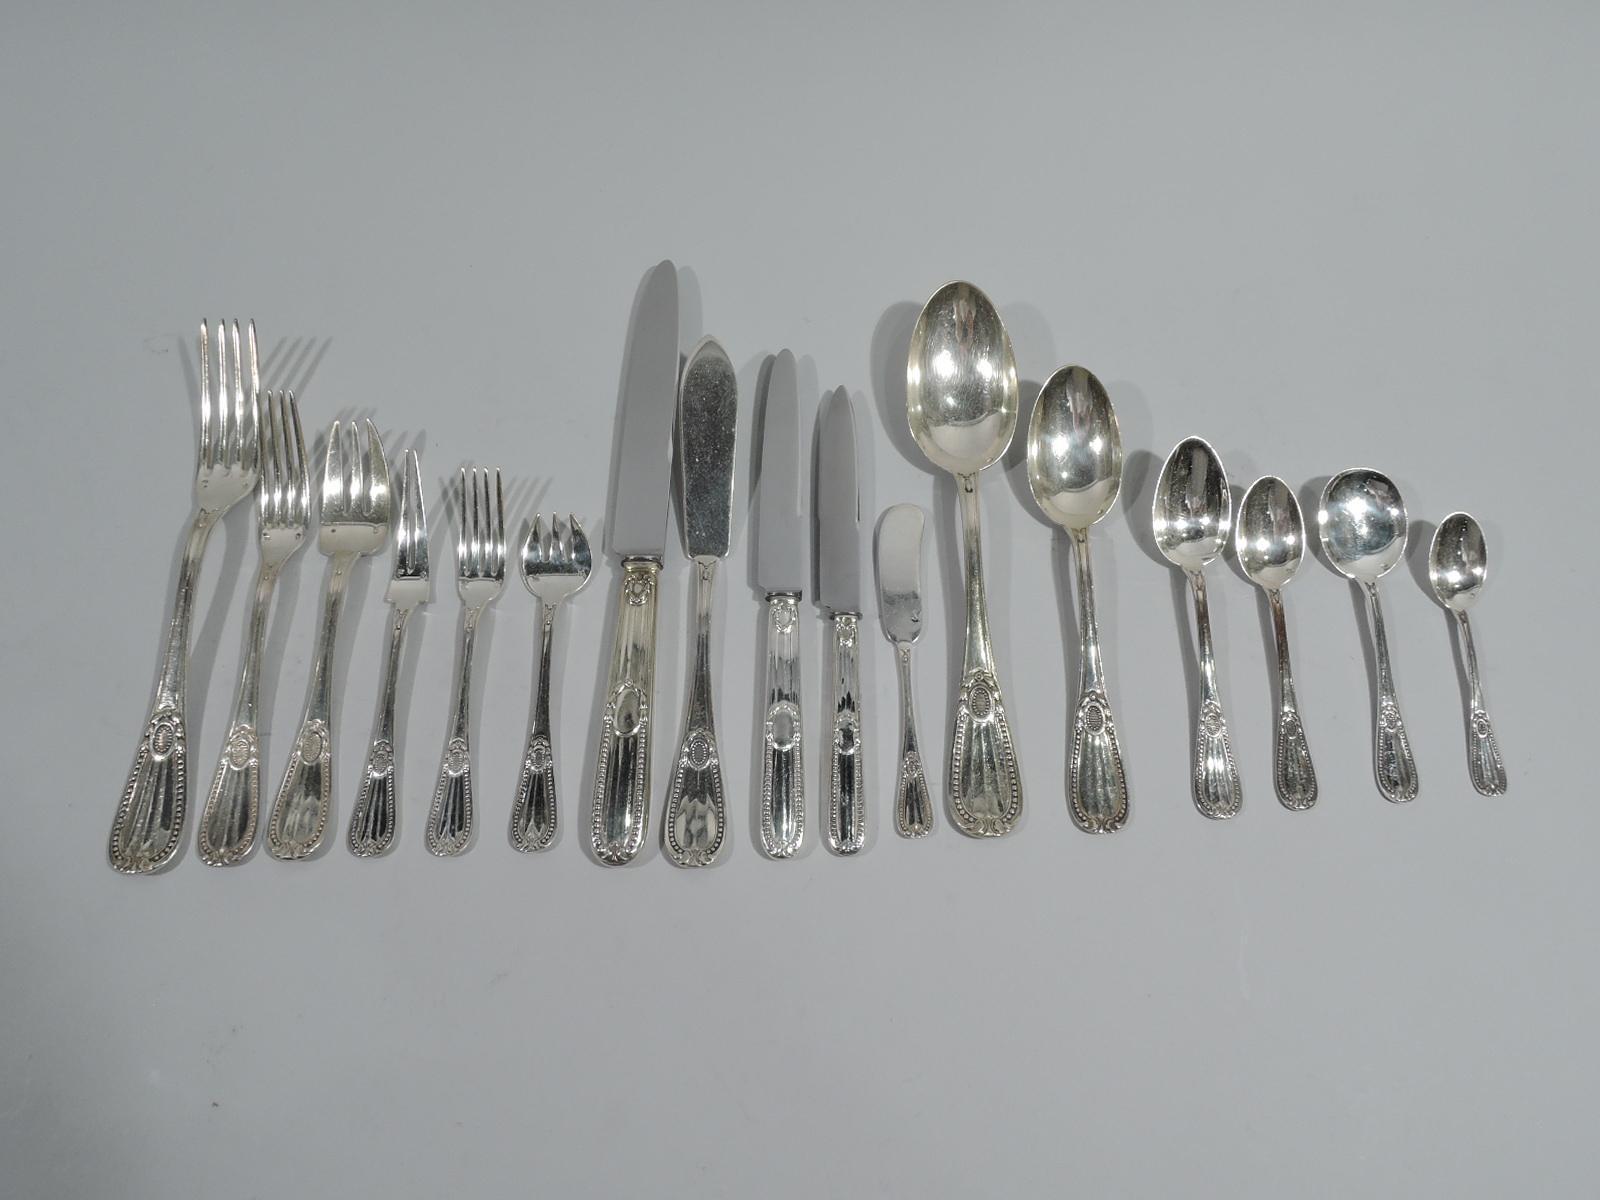 Perles 950 silver dinner and lunch set for 24. Made by Tetard Frères in France. This set comprises 474 pieces (dimensions in inches):

Forks: 24 dinner forks (8 1/2), 22 lunch forks (7), 24 fish forks (6 5/8), 24 seafood forks (5), 24 dessert